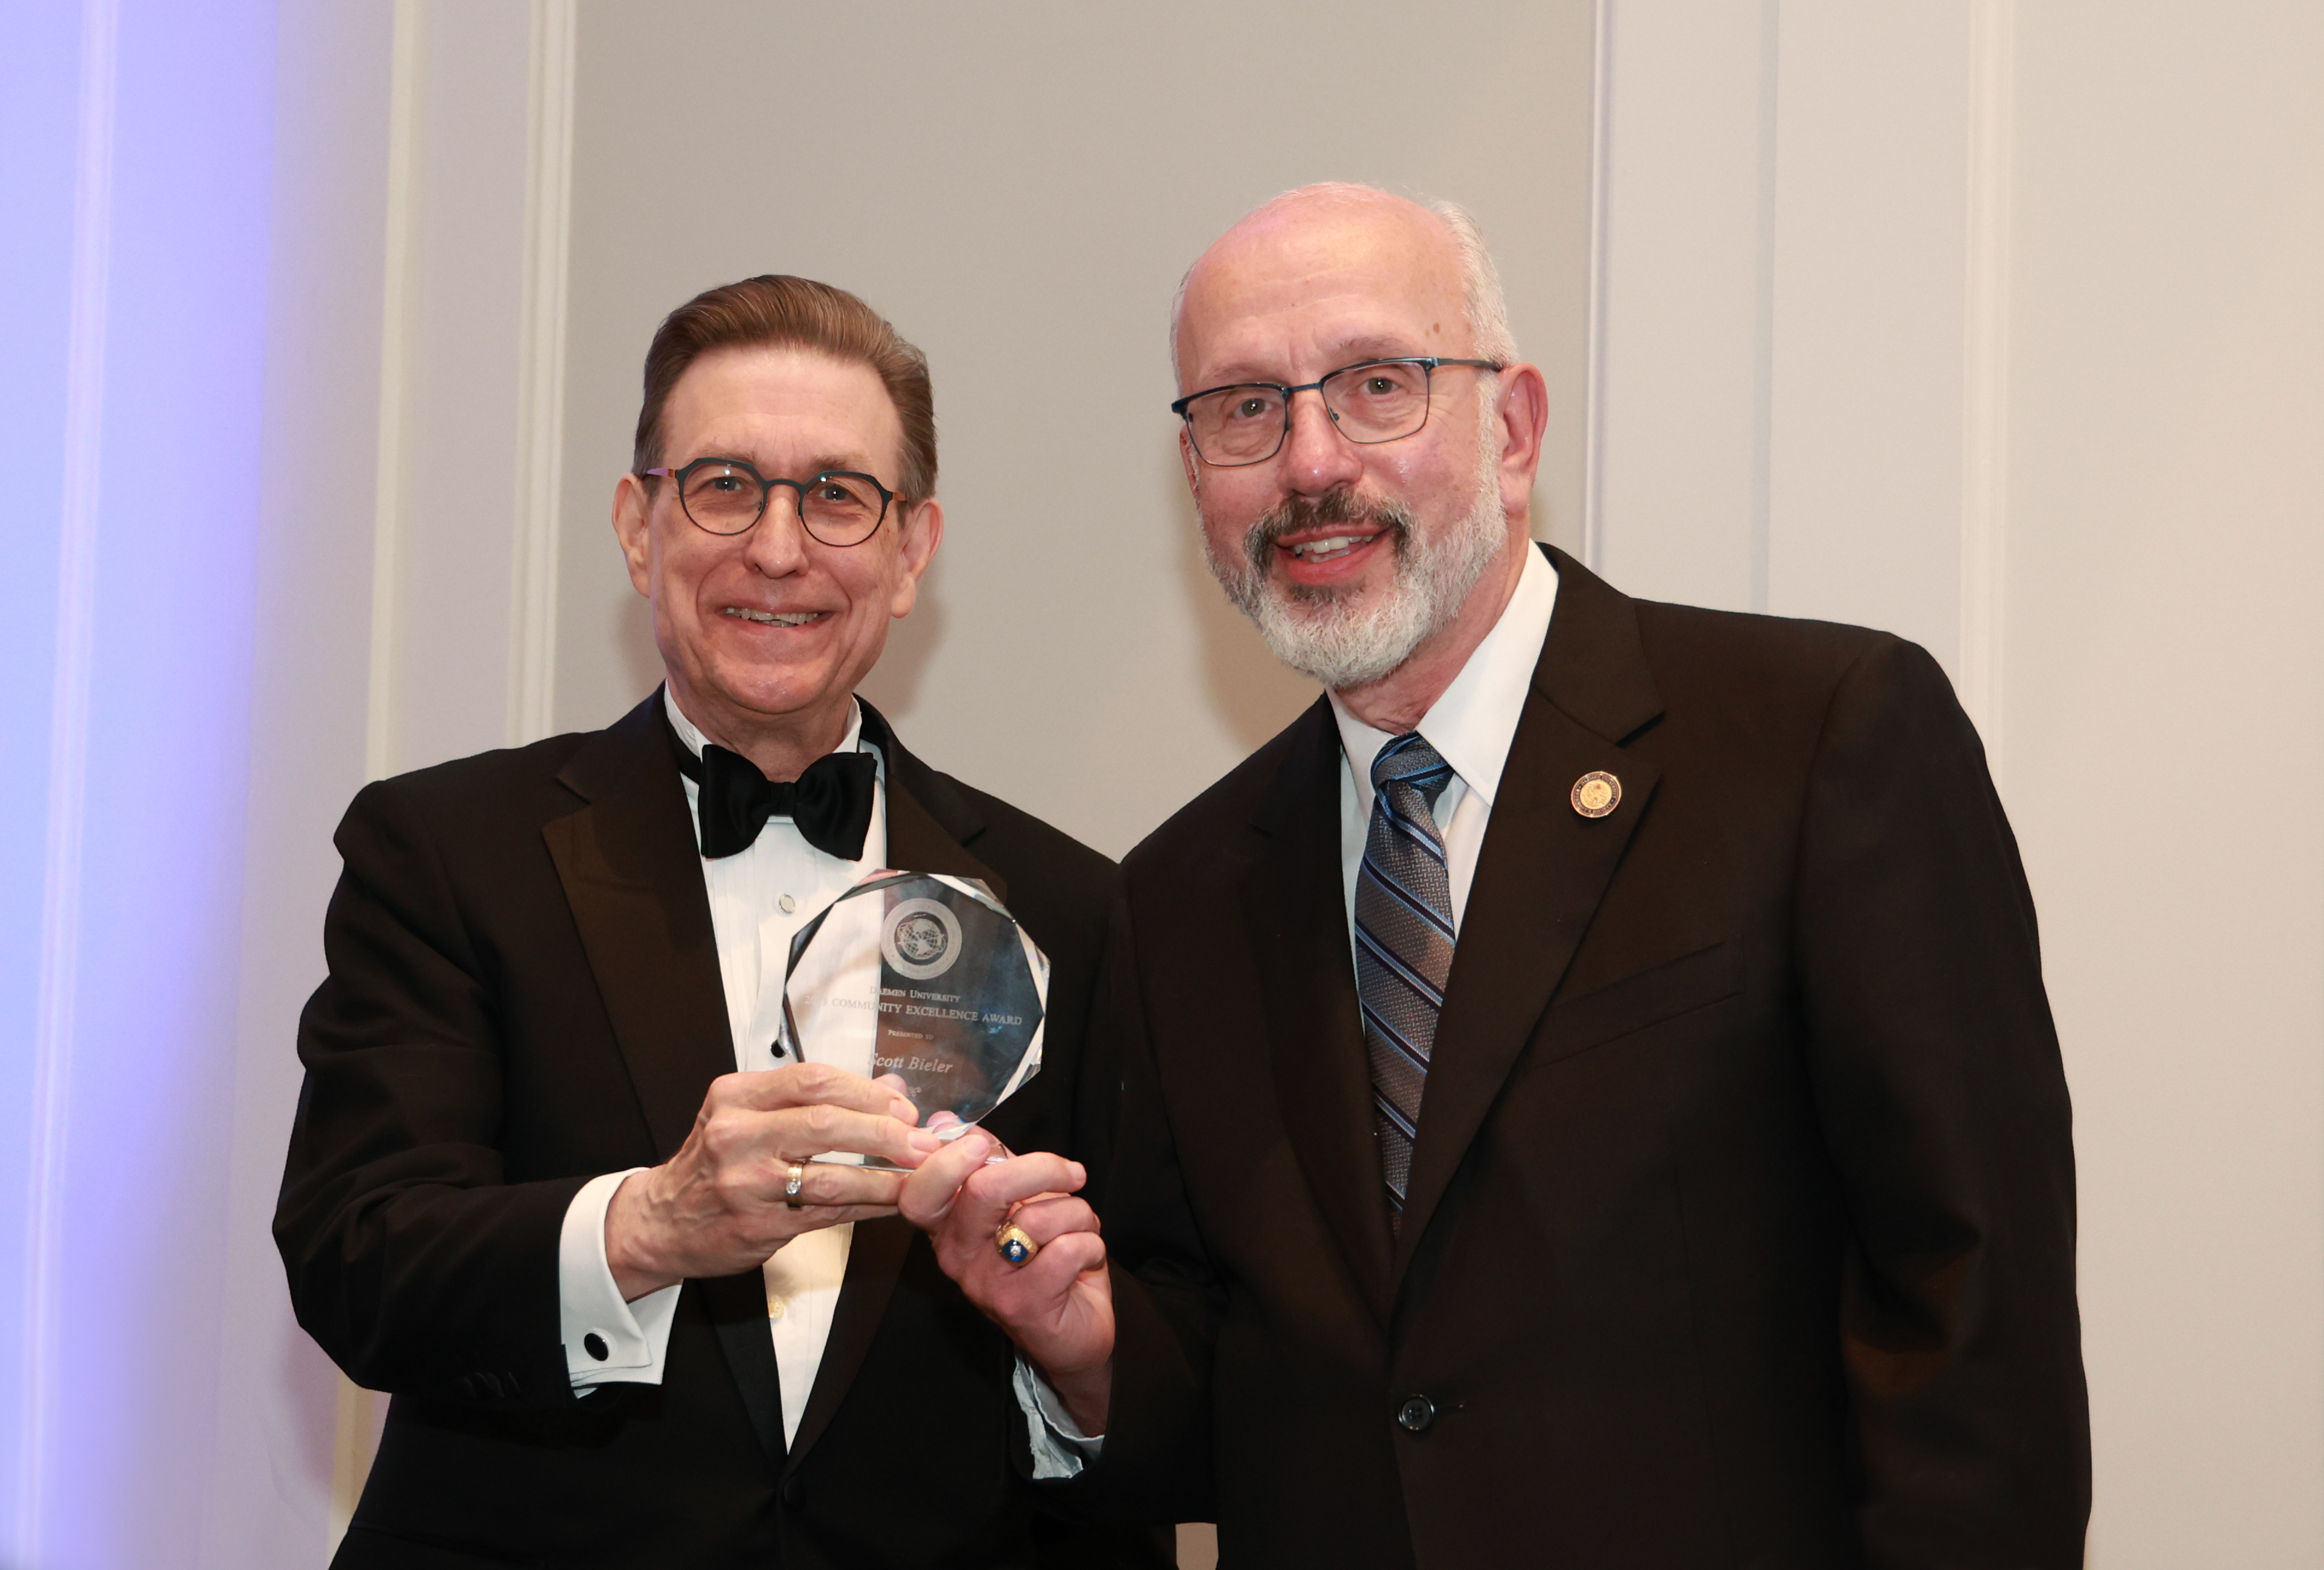 President Gary A. Olson in tuxedo and Scott Bieler in suit holding excellence award